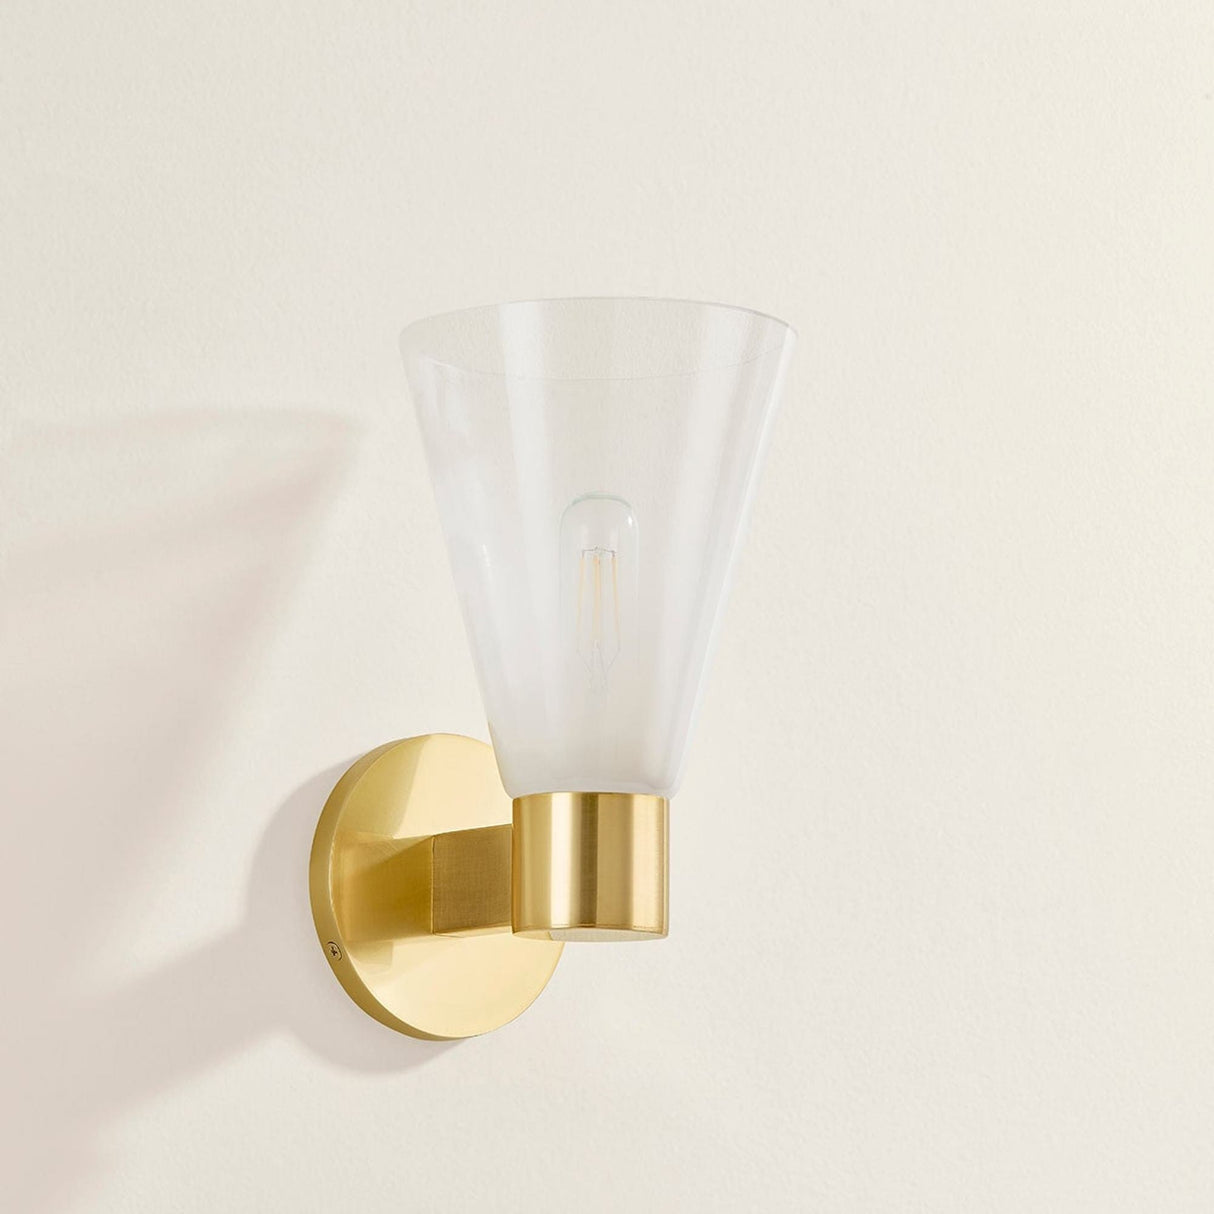 Mitzi Alma One Light Wall Sconce Wall Sconces